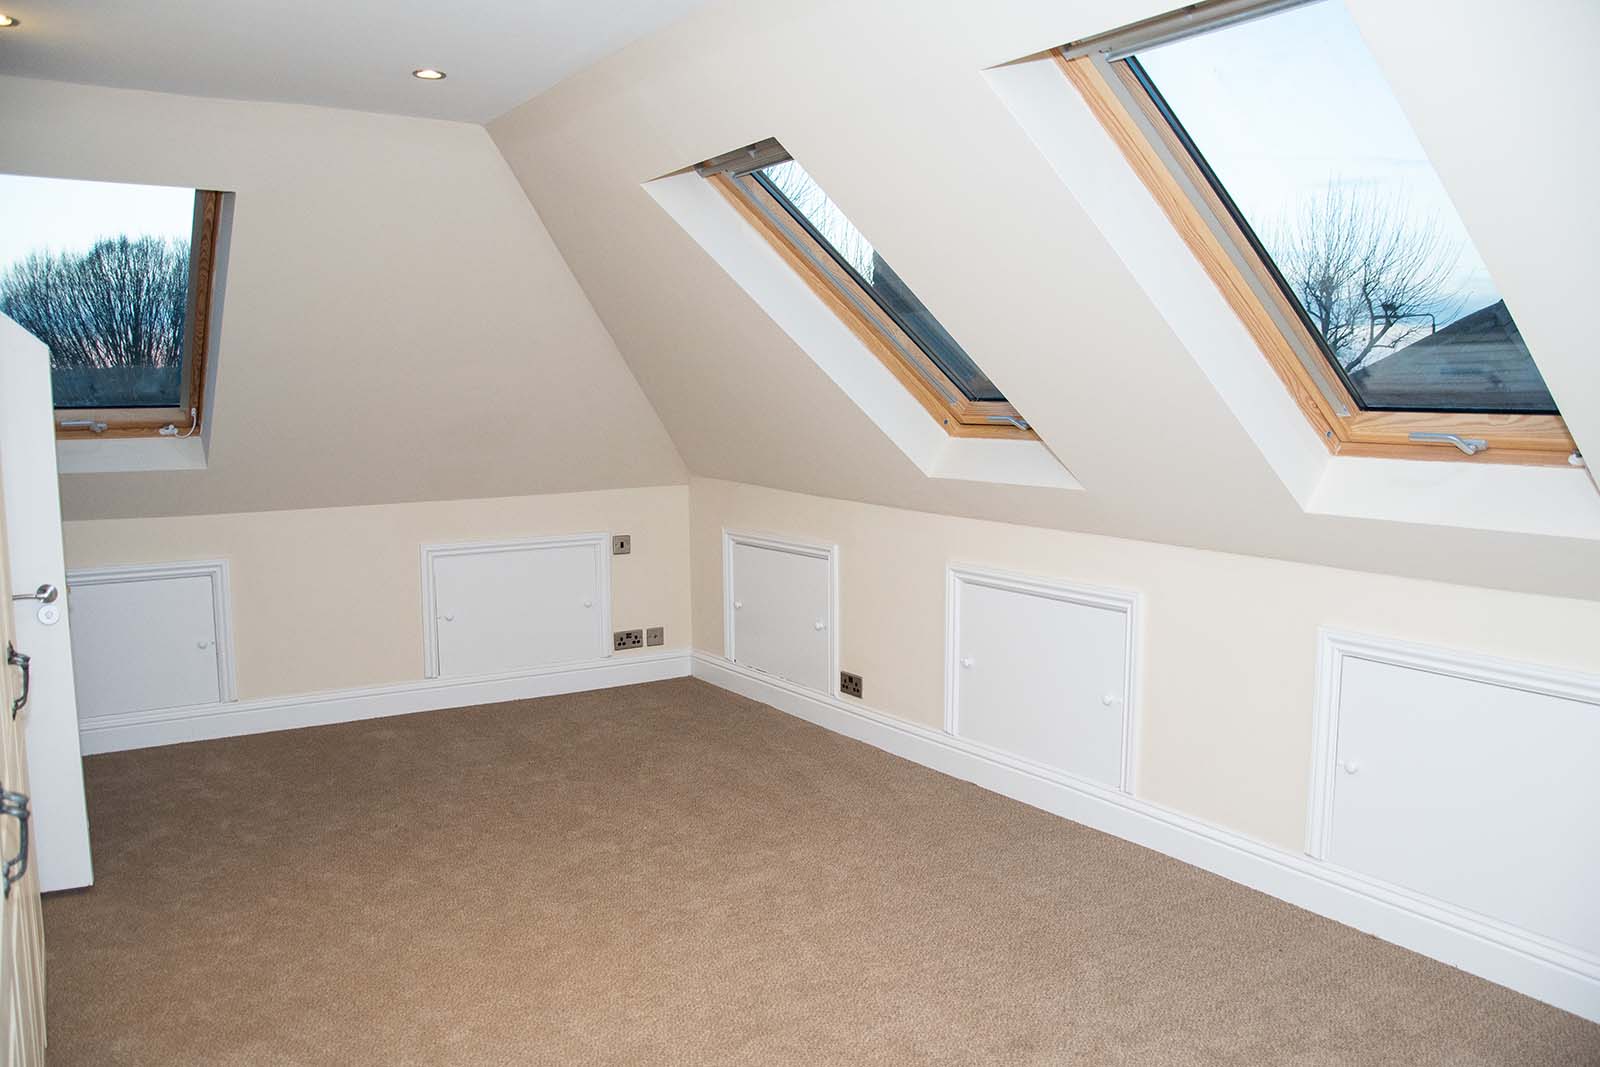 Carpeted loft room with 3 windows and and slanted walls